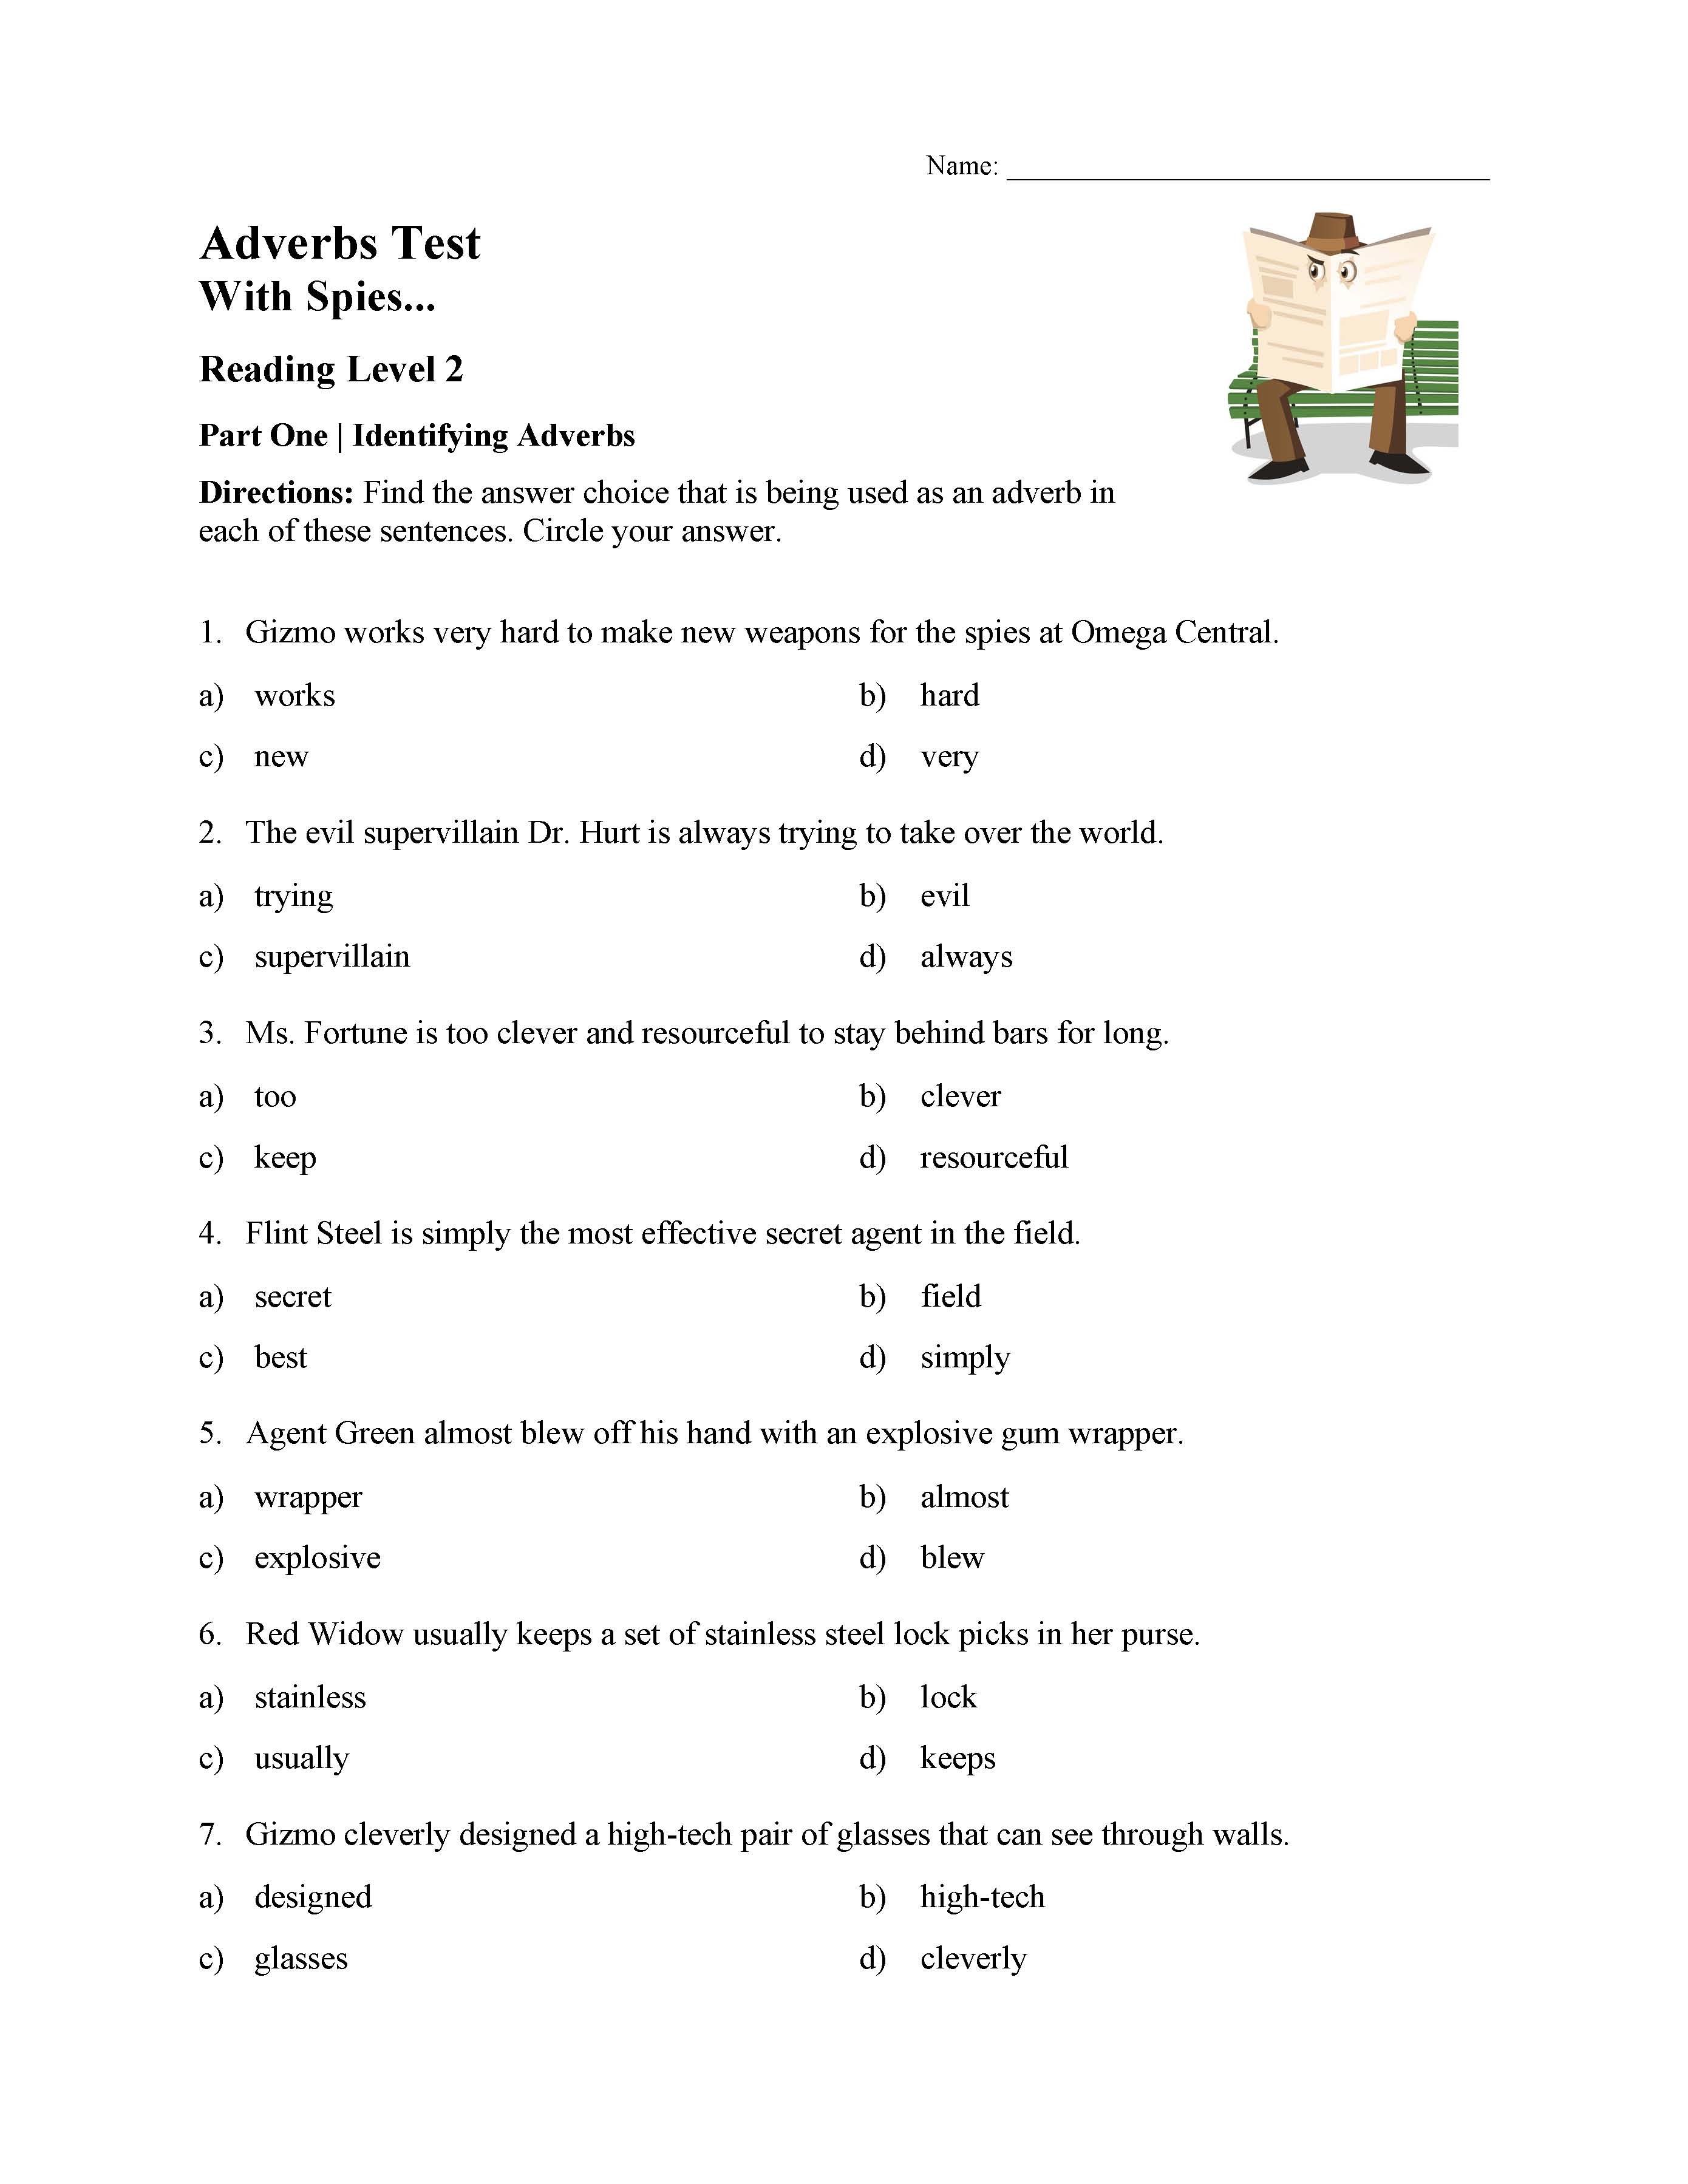 identifying-adjectives-and-adverbs-in-sentences-worksheets-free-printable-adjectives-worksheets